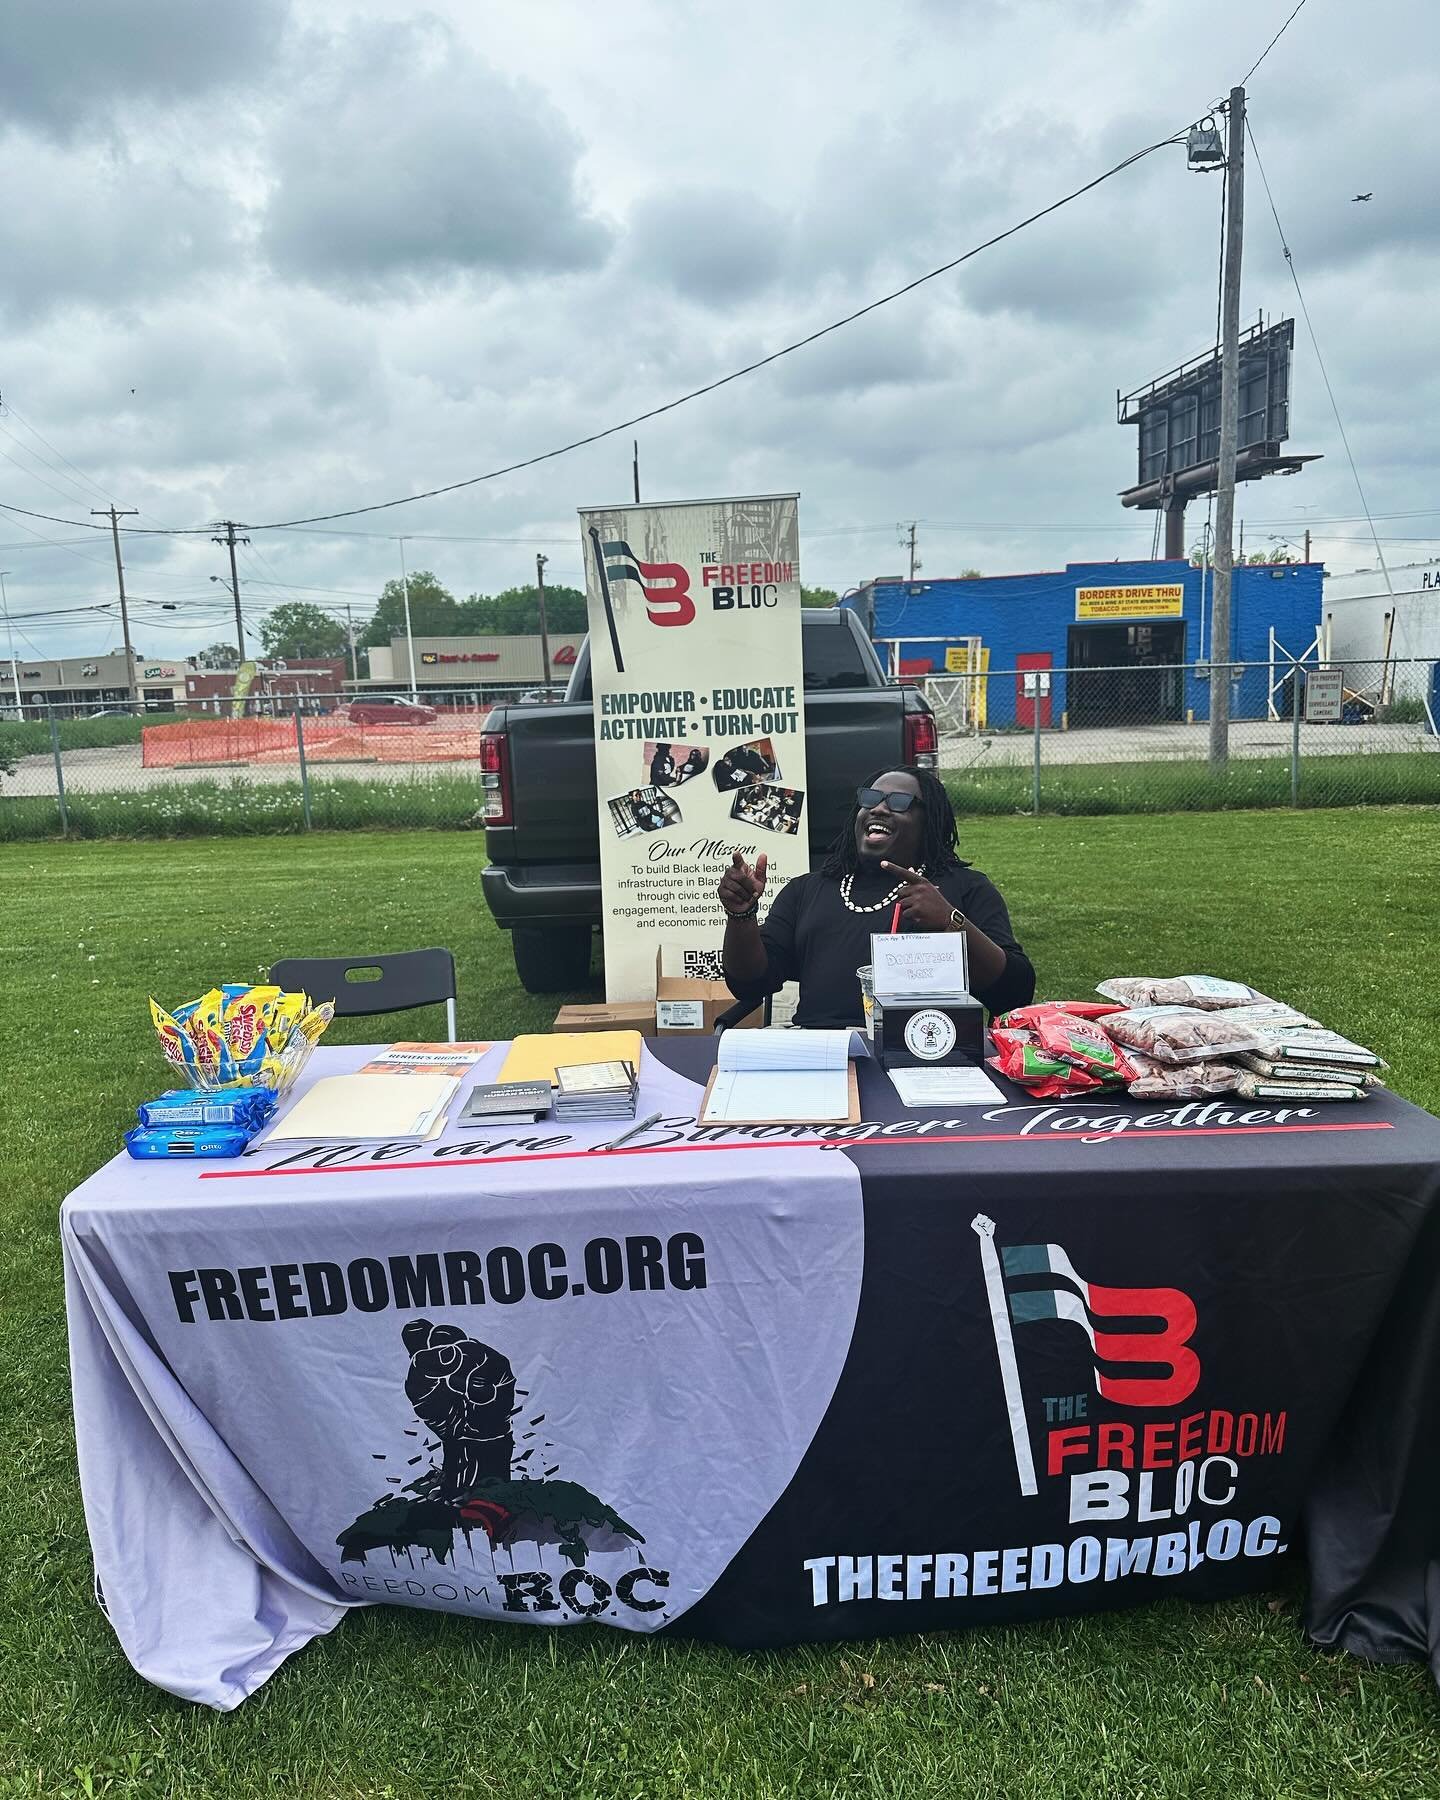 Catch us today at Collinson Apartments for the Tenant Council&rsquo;s May Day event! #Housing #HumanRight #FreedomBLOC